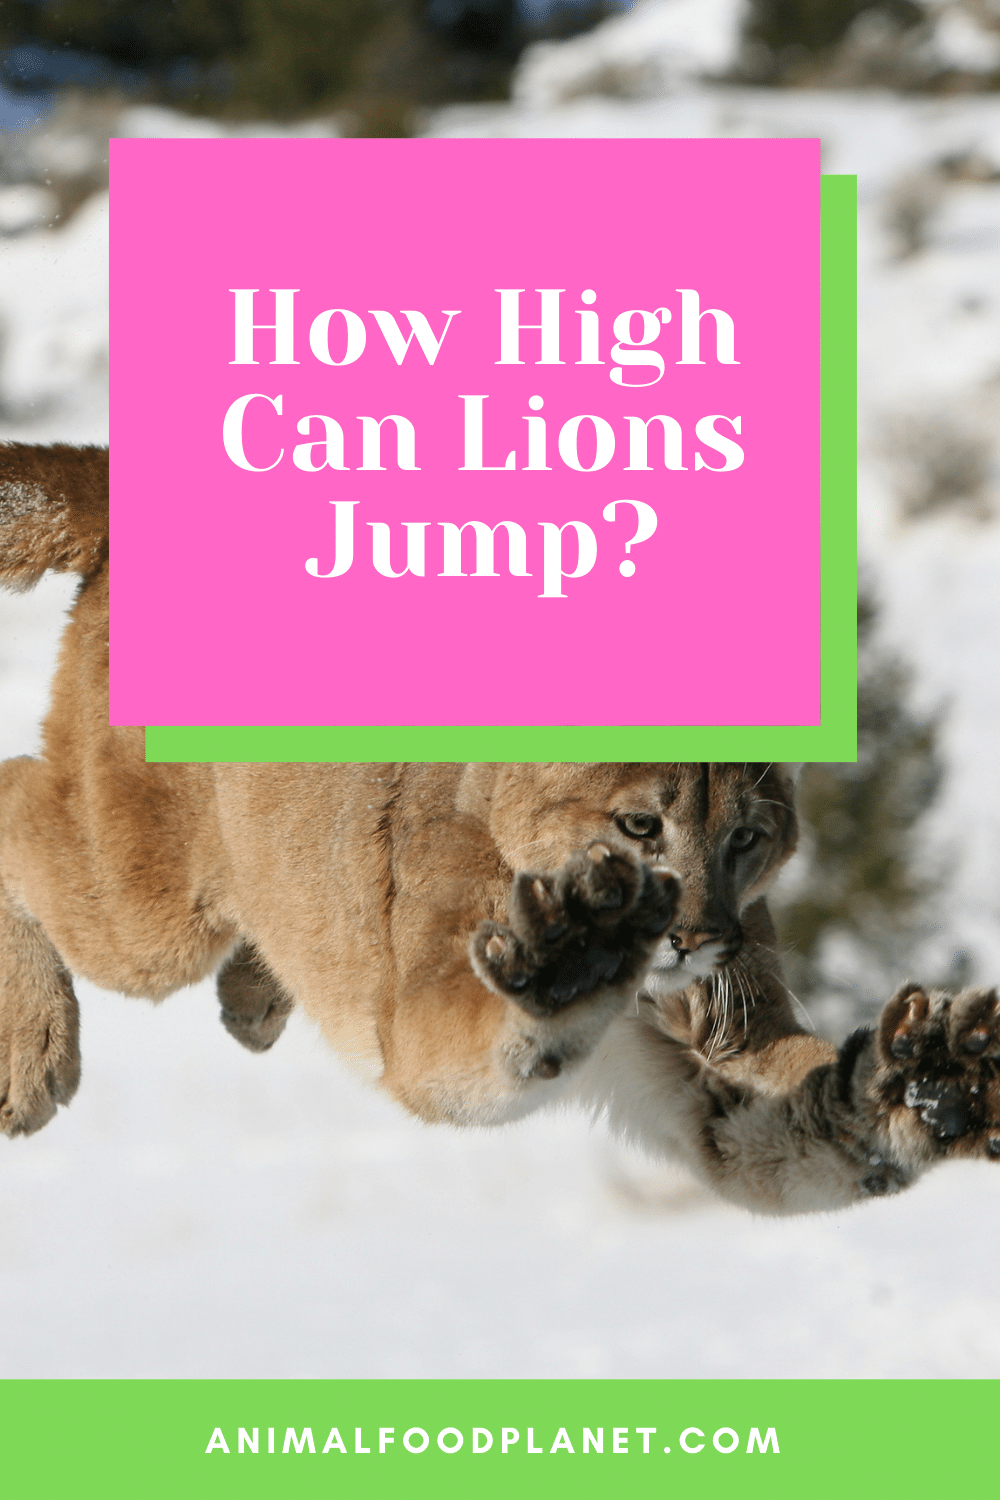 How High Can Lions Jump?